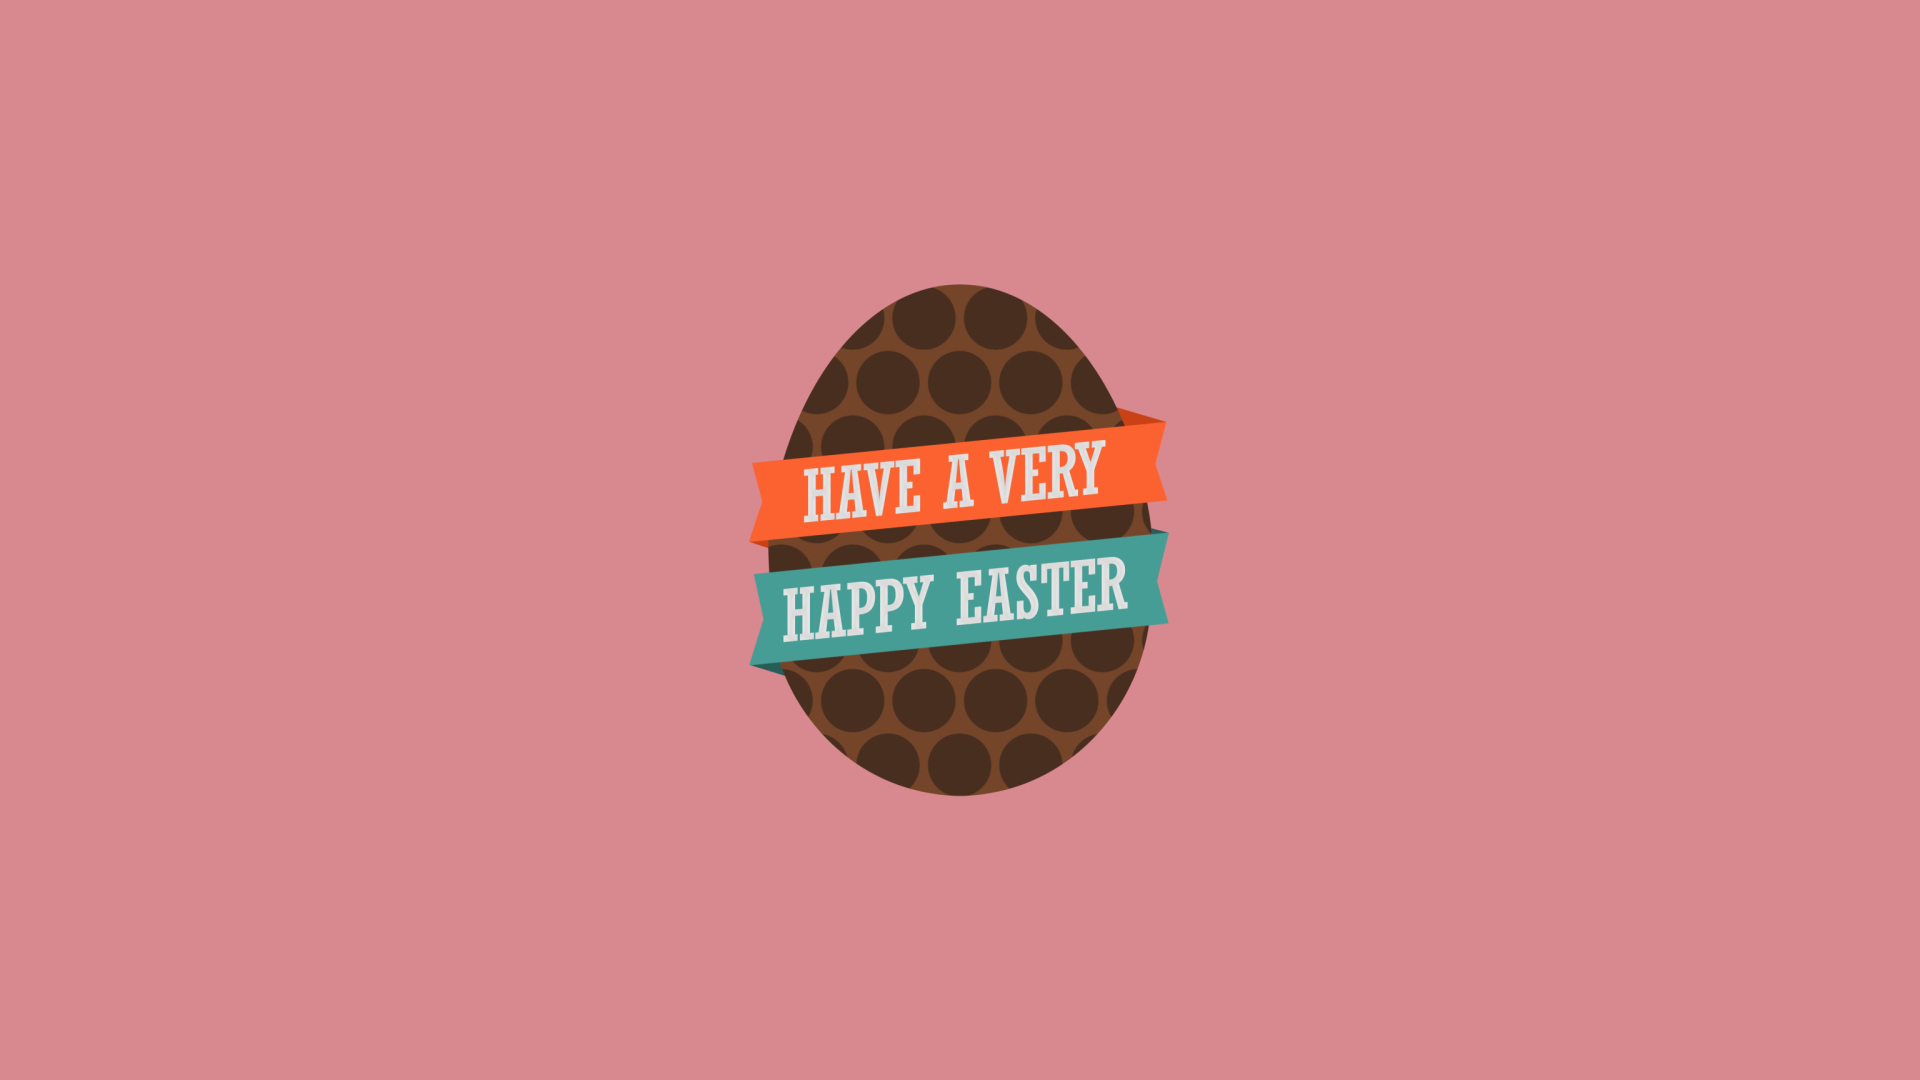 Very Happy Easter Egg wallpaper 1920x1080